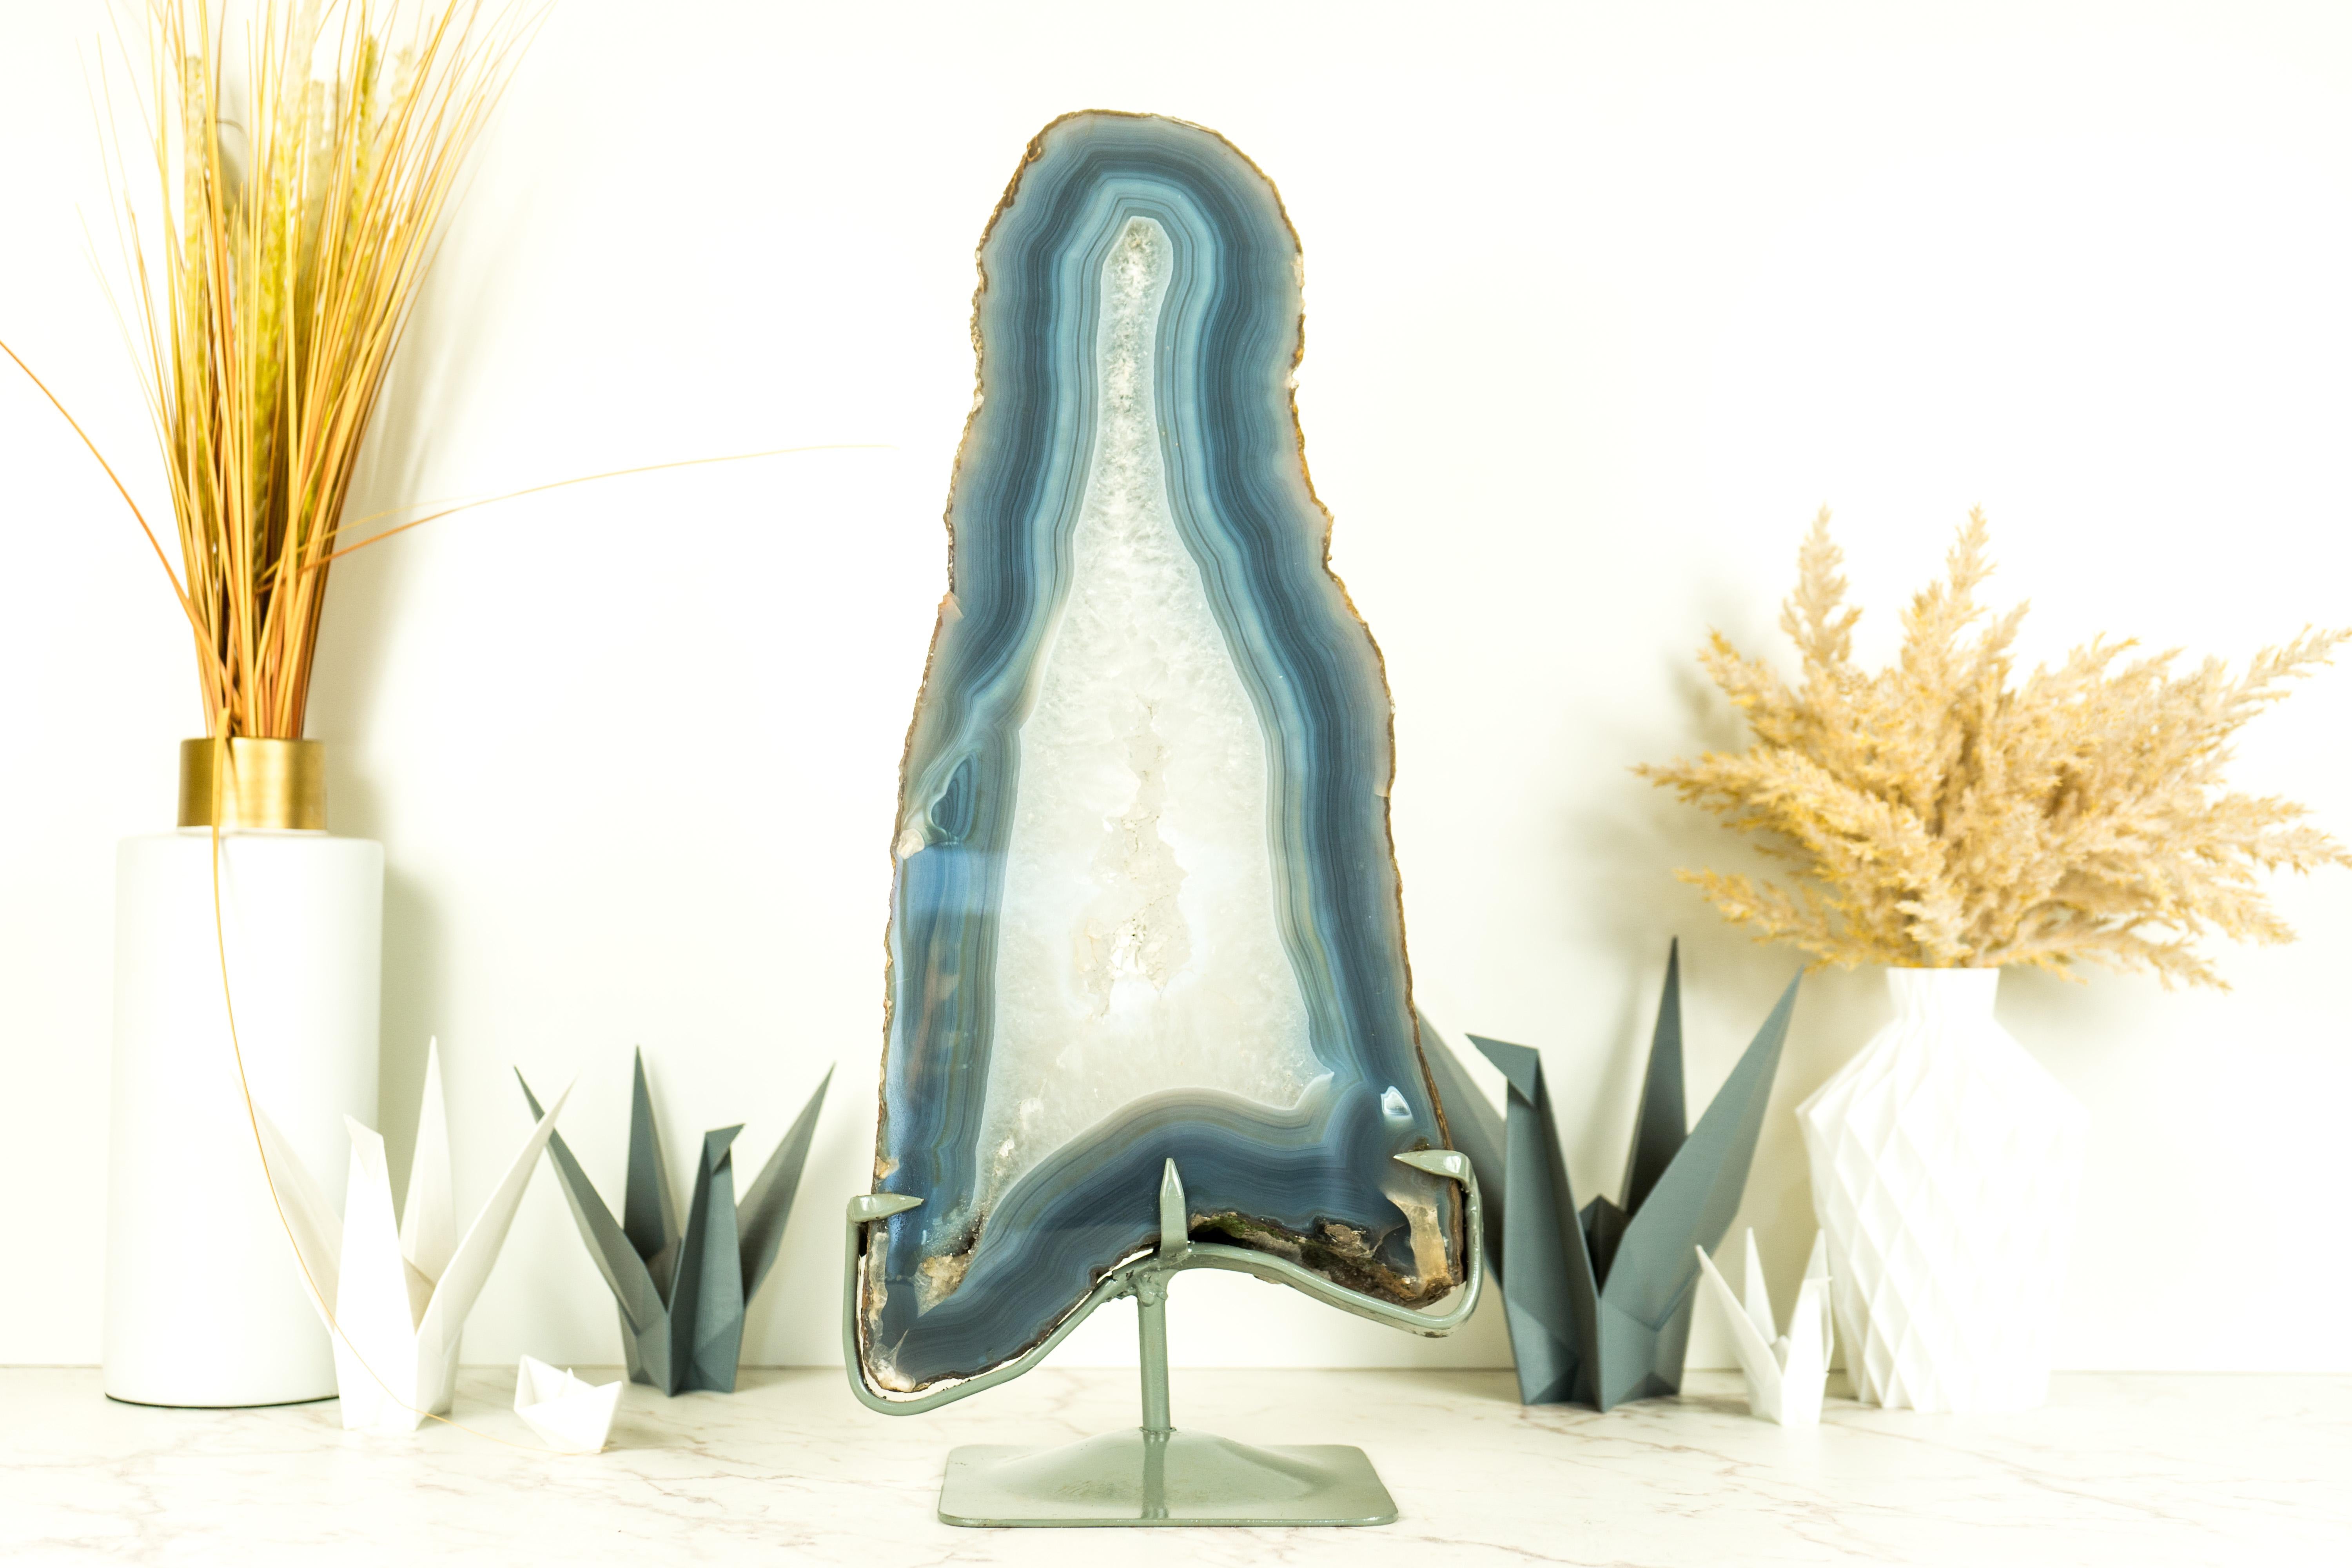 Showcasing the rare beauty of blue and white lace agate in a gorgeous tall format, this Agate Geode Slice is a natural artwork that will surely enhance your decor as a centerpiece, a large bookshelf accent, or a powerful tool in your healing arsenal